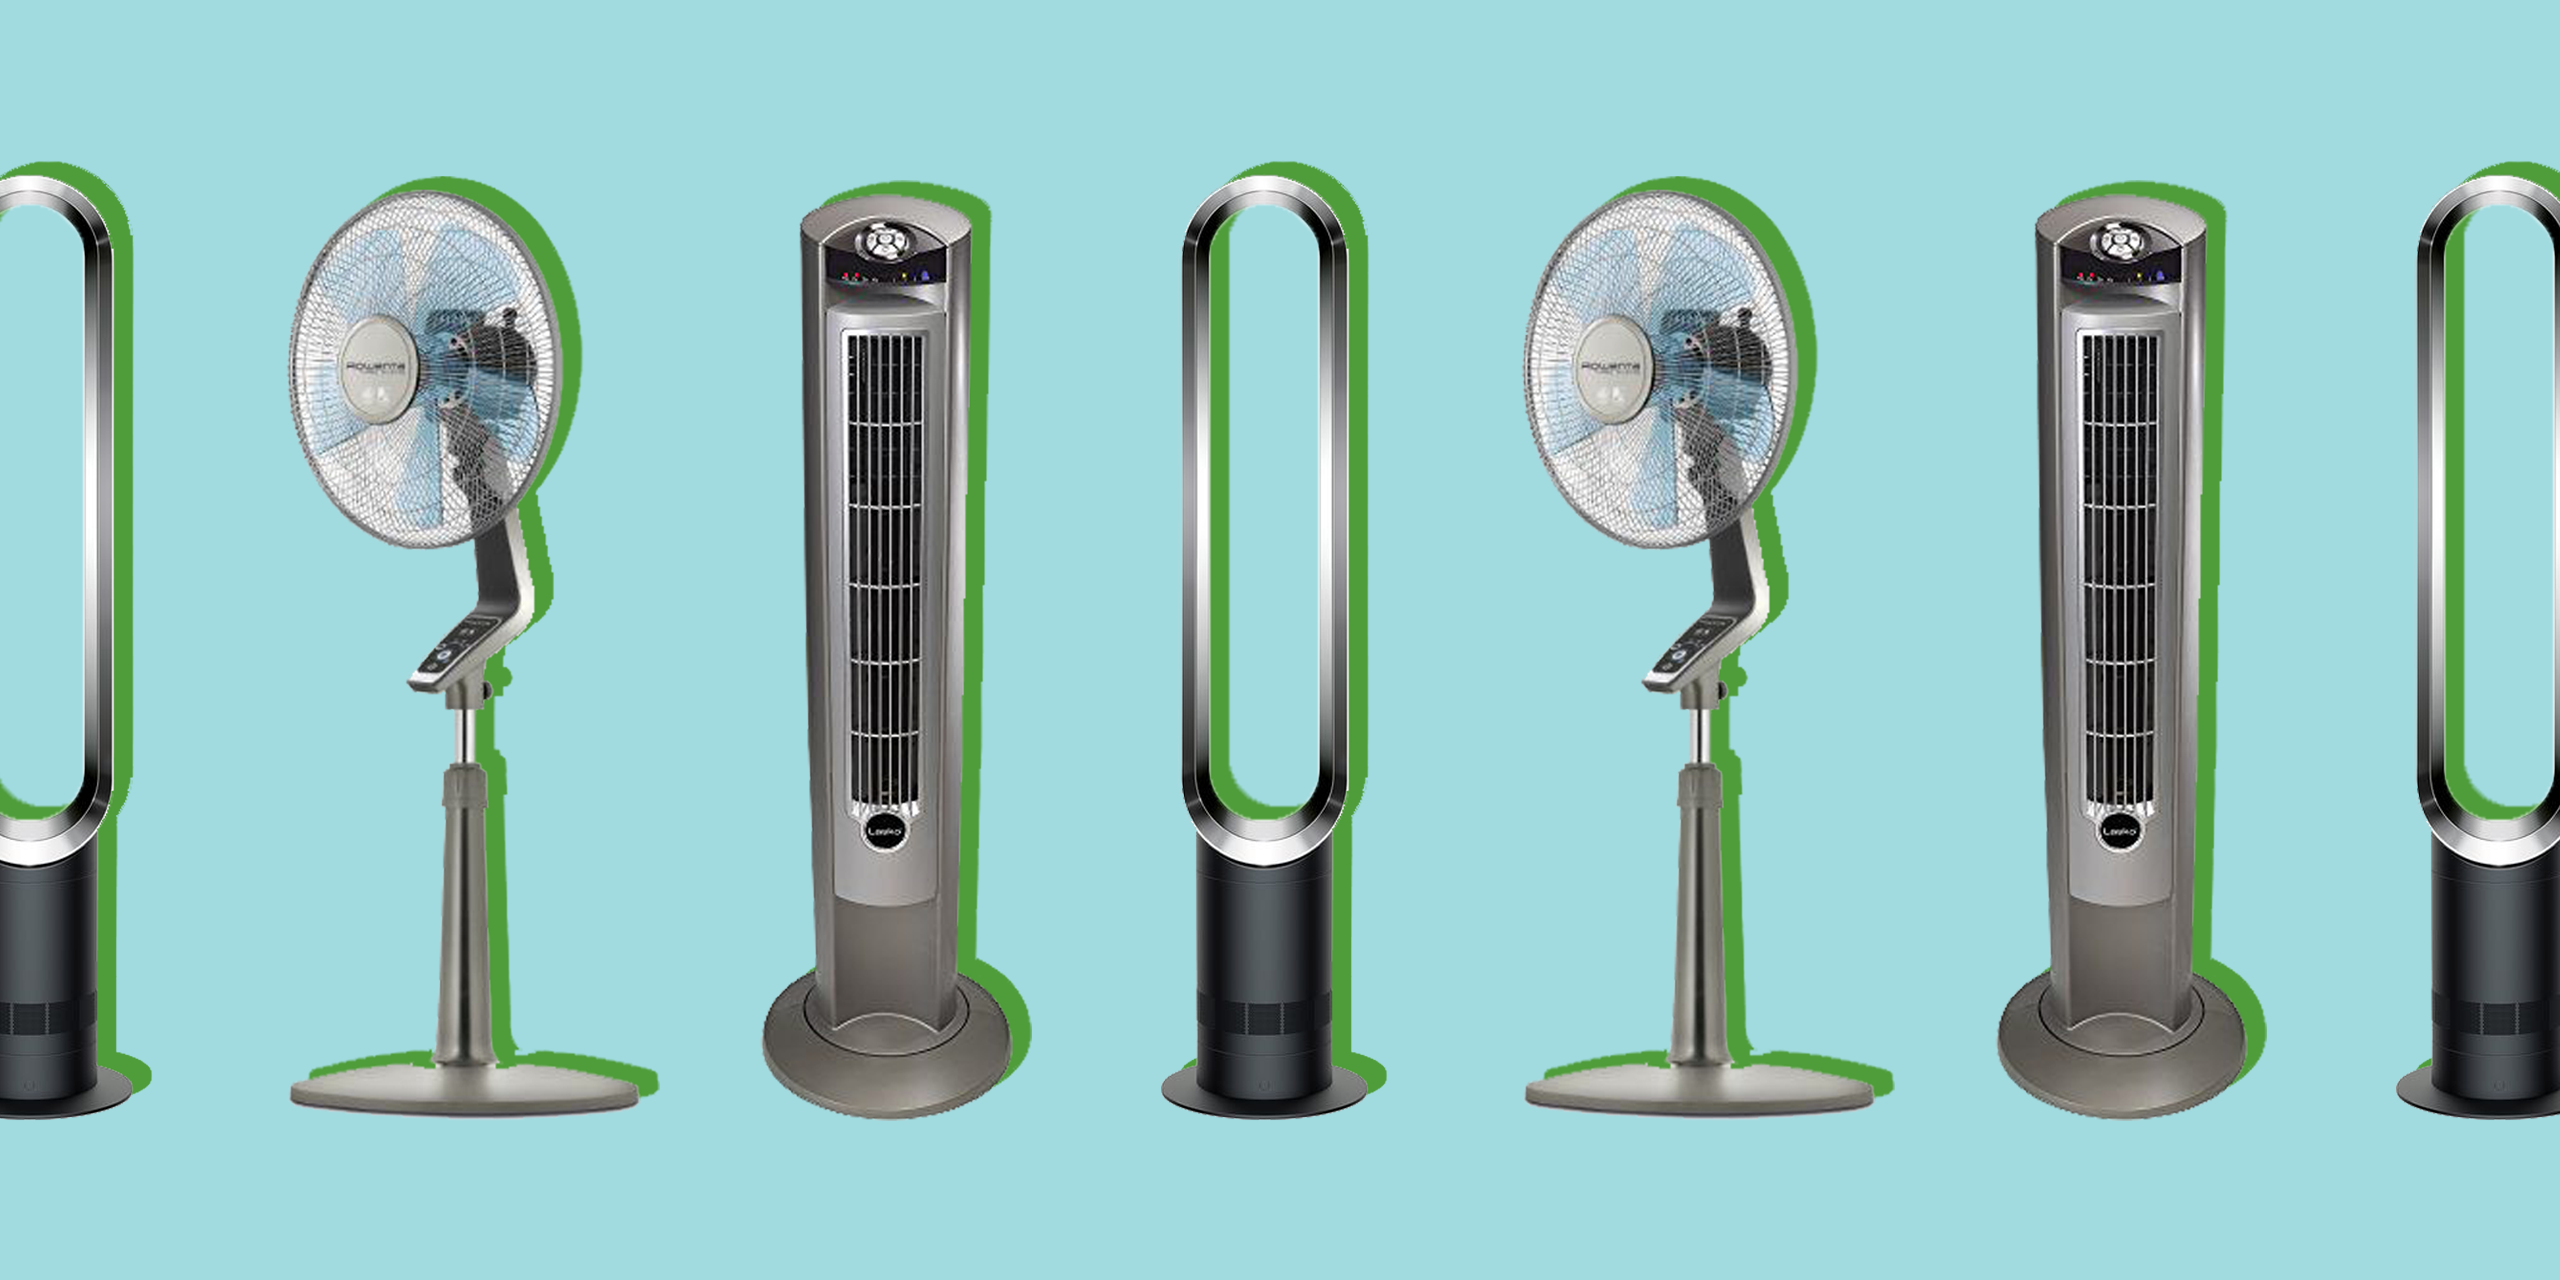 elektropositive vride Cirkus 12 Best Cooling Fans to Try in 2023 - Top-Rated Electric Fans